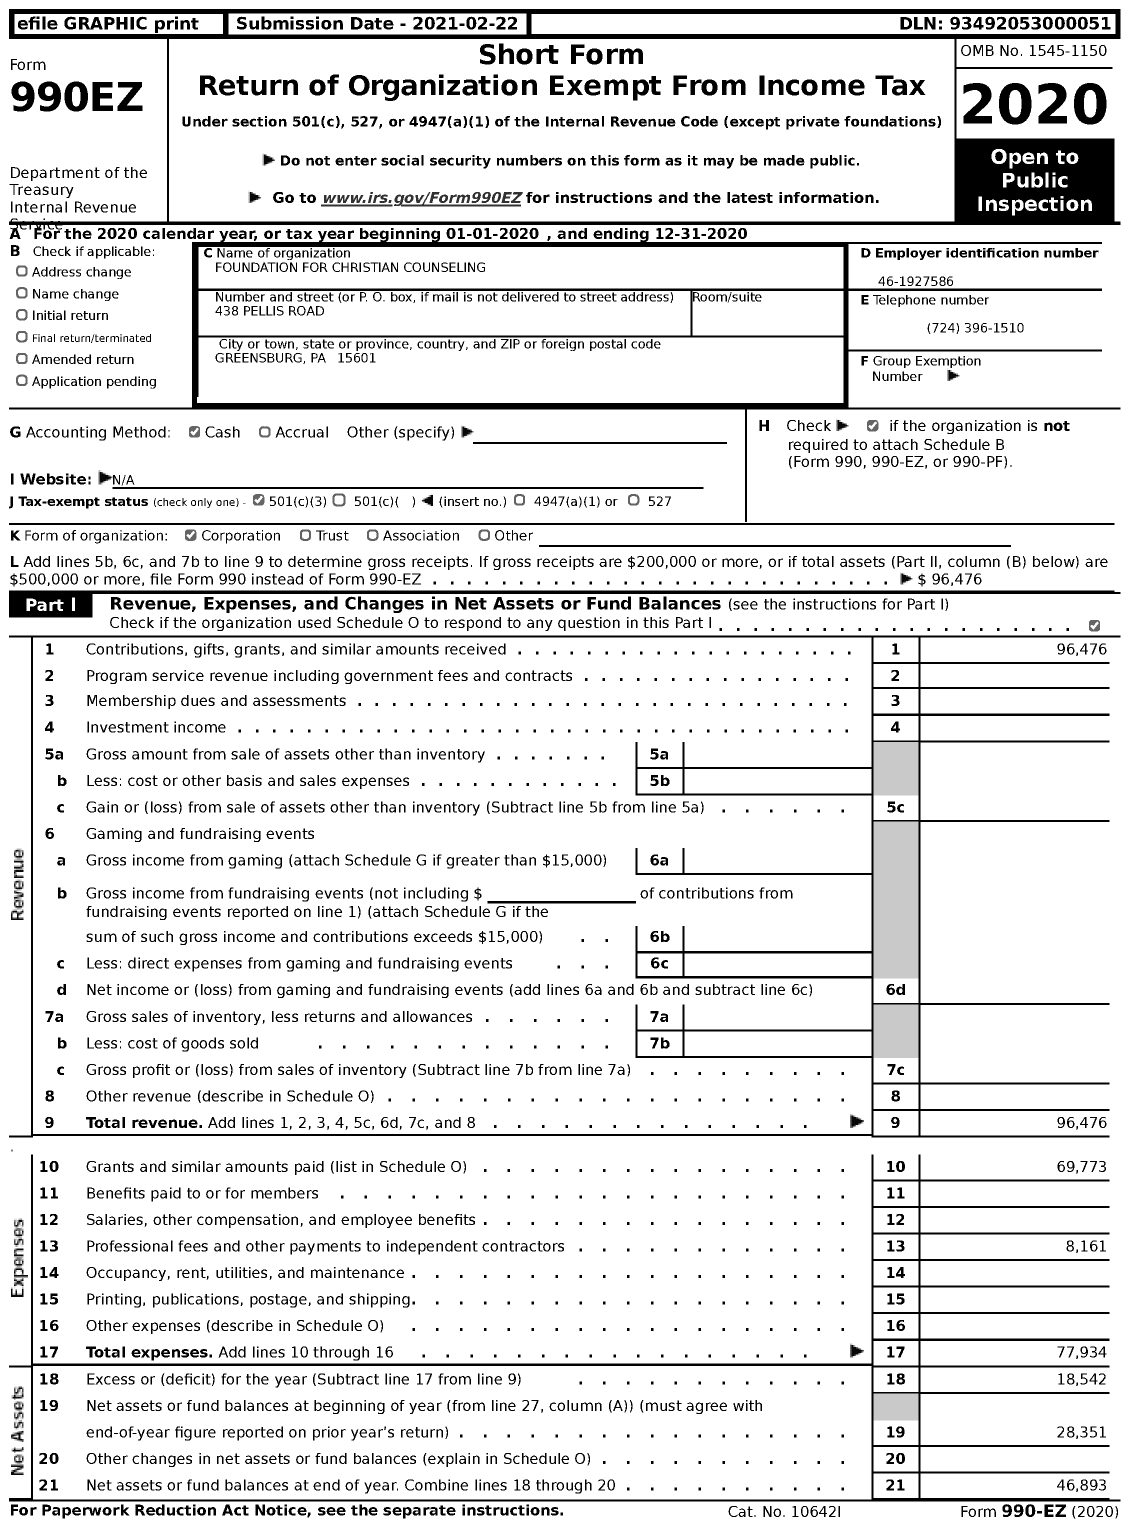 Image of first page of 2020 Form 990EZ for Foundation for Christian Counseling